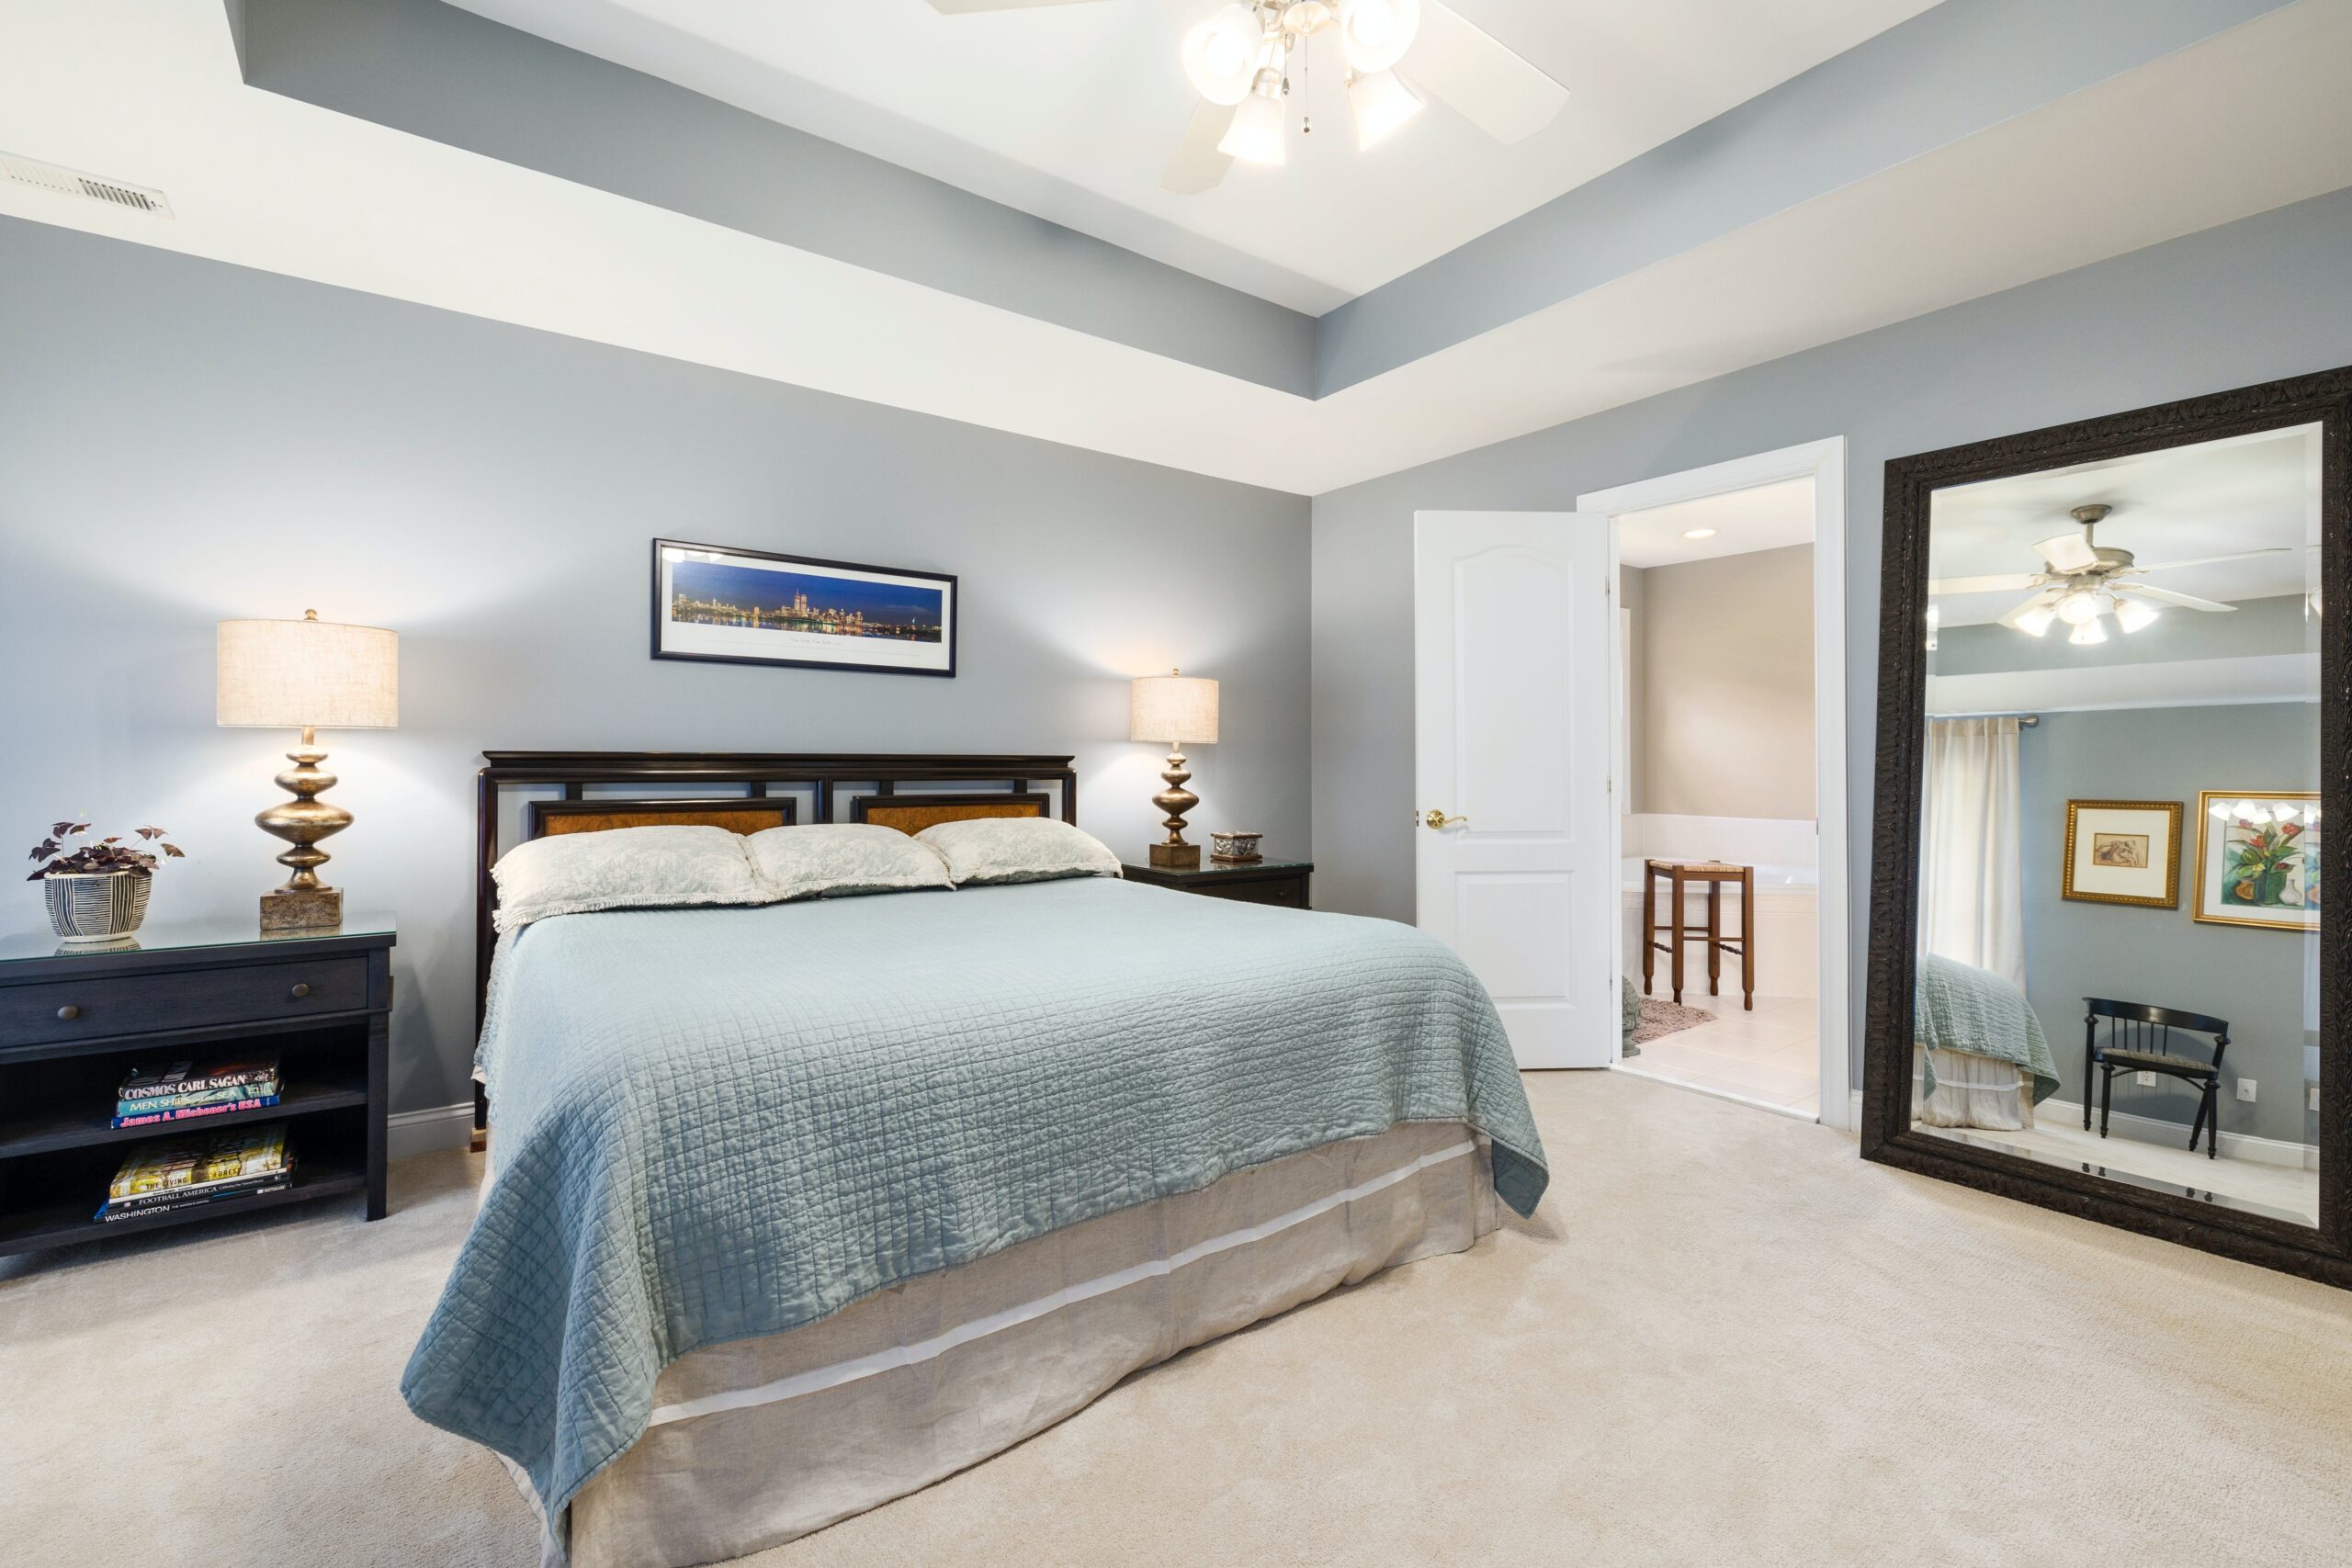 Light blue is one of the most calming paint colors for bedrooms. Pictured: A light blue bedroom.